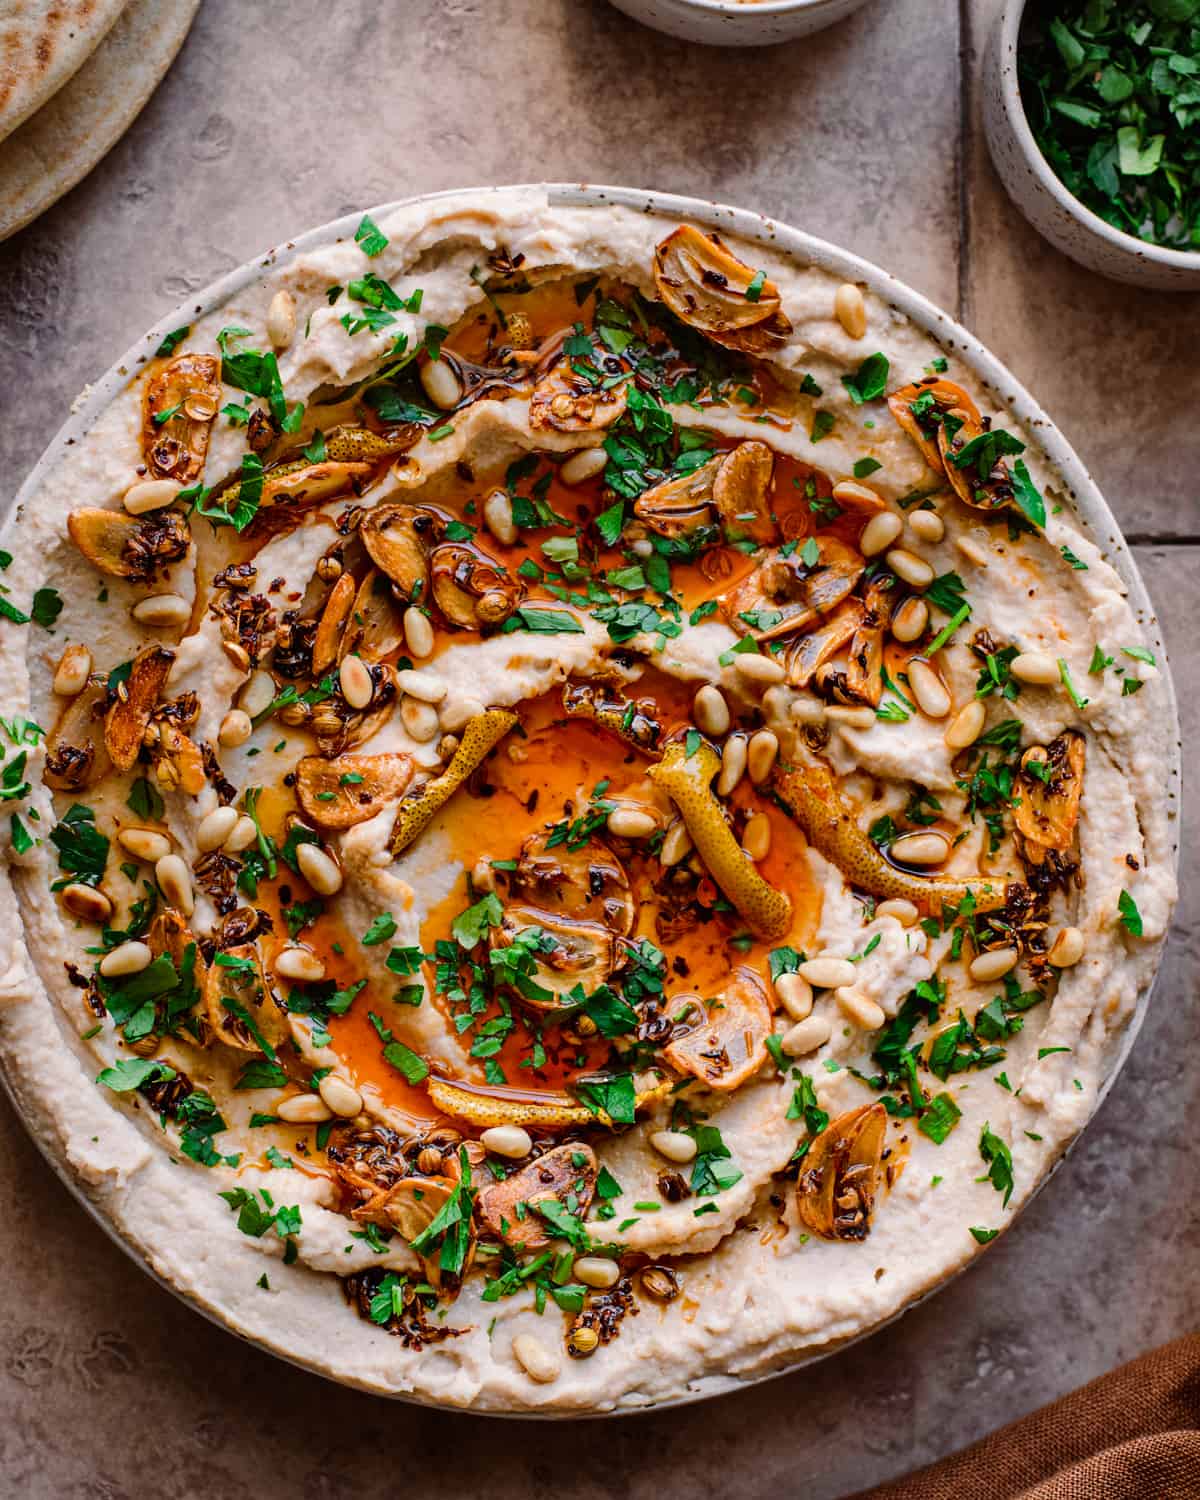 white bean dip with chili oil, garlic, parsley and pine nuts on tiled surface with pita bread